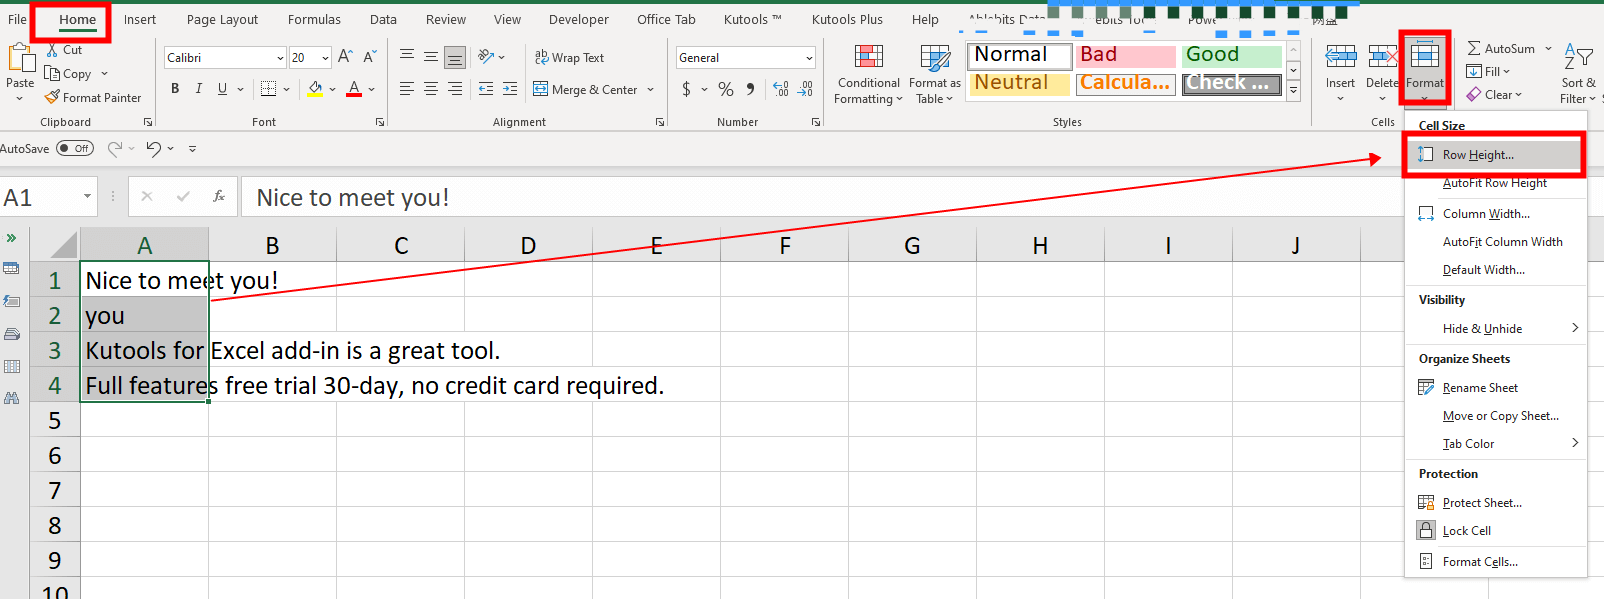 doc hide-overflowing-text-without-populate 2